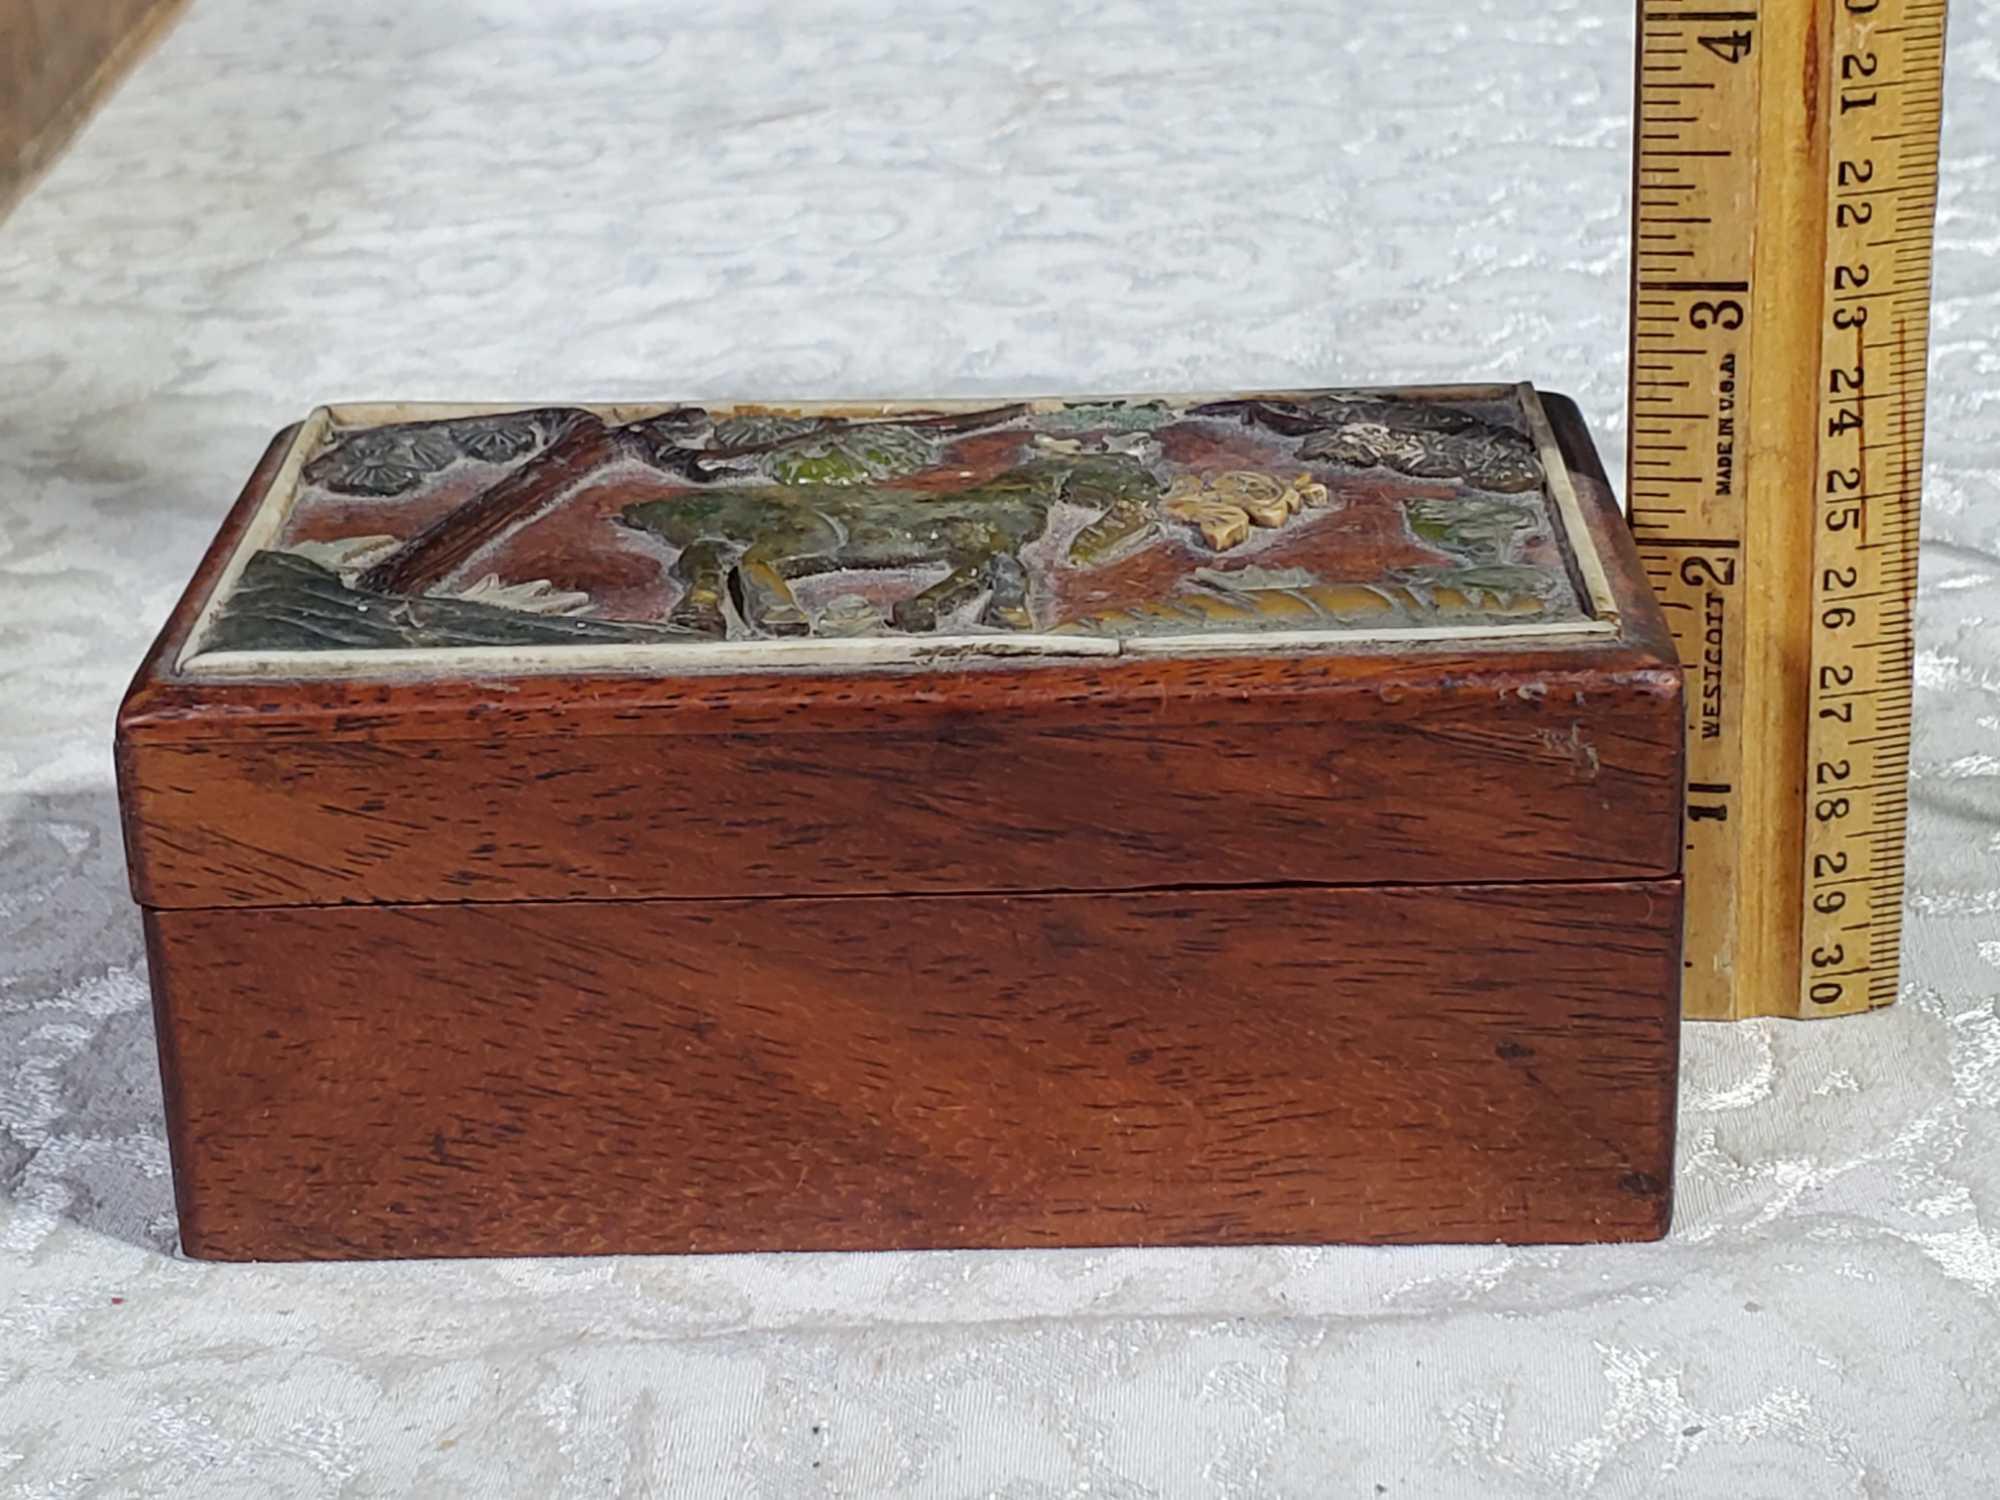 Herend, Tiffany & Co, Wedgwood, Lenox, Inlaid Wood and Other Novelty and Trinket Boxes